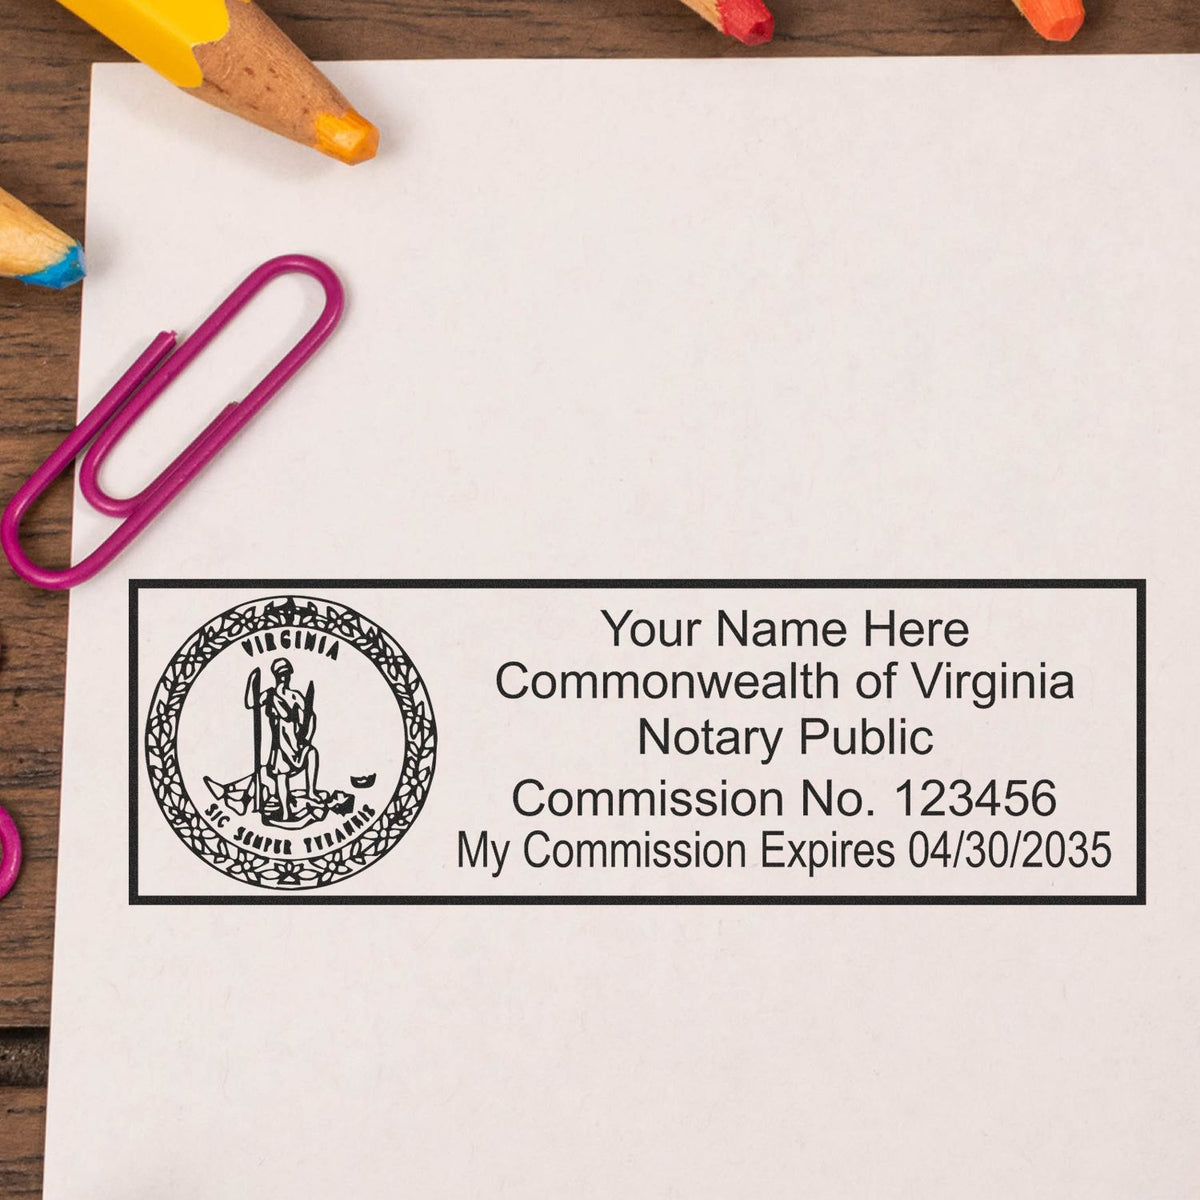 The Slim Pre-Inked State Seal Notary Stamp for Virginia stamp impression comes to life with a crisp, detailed photo on paper - showcasing true professional quality.